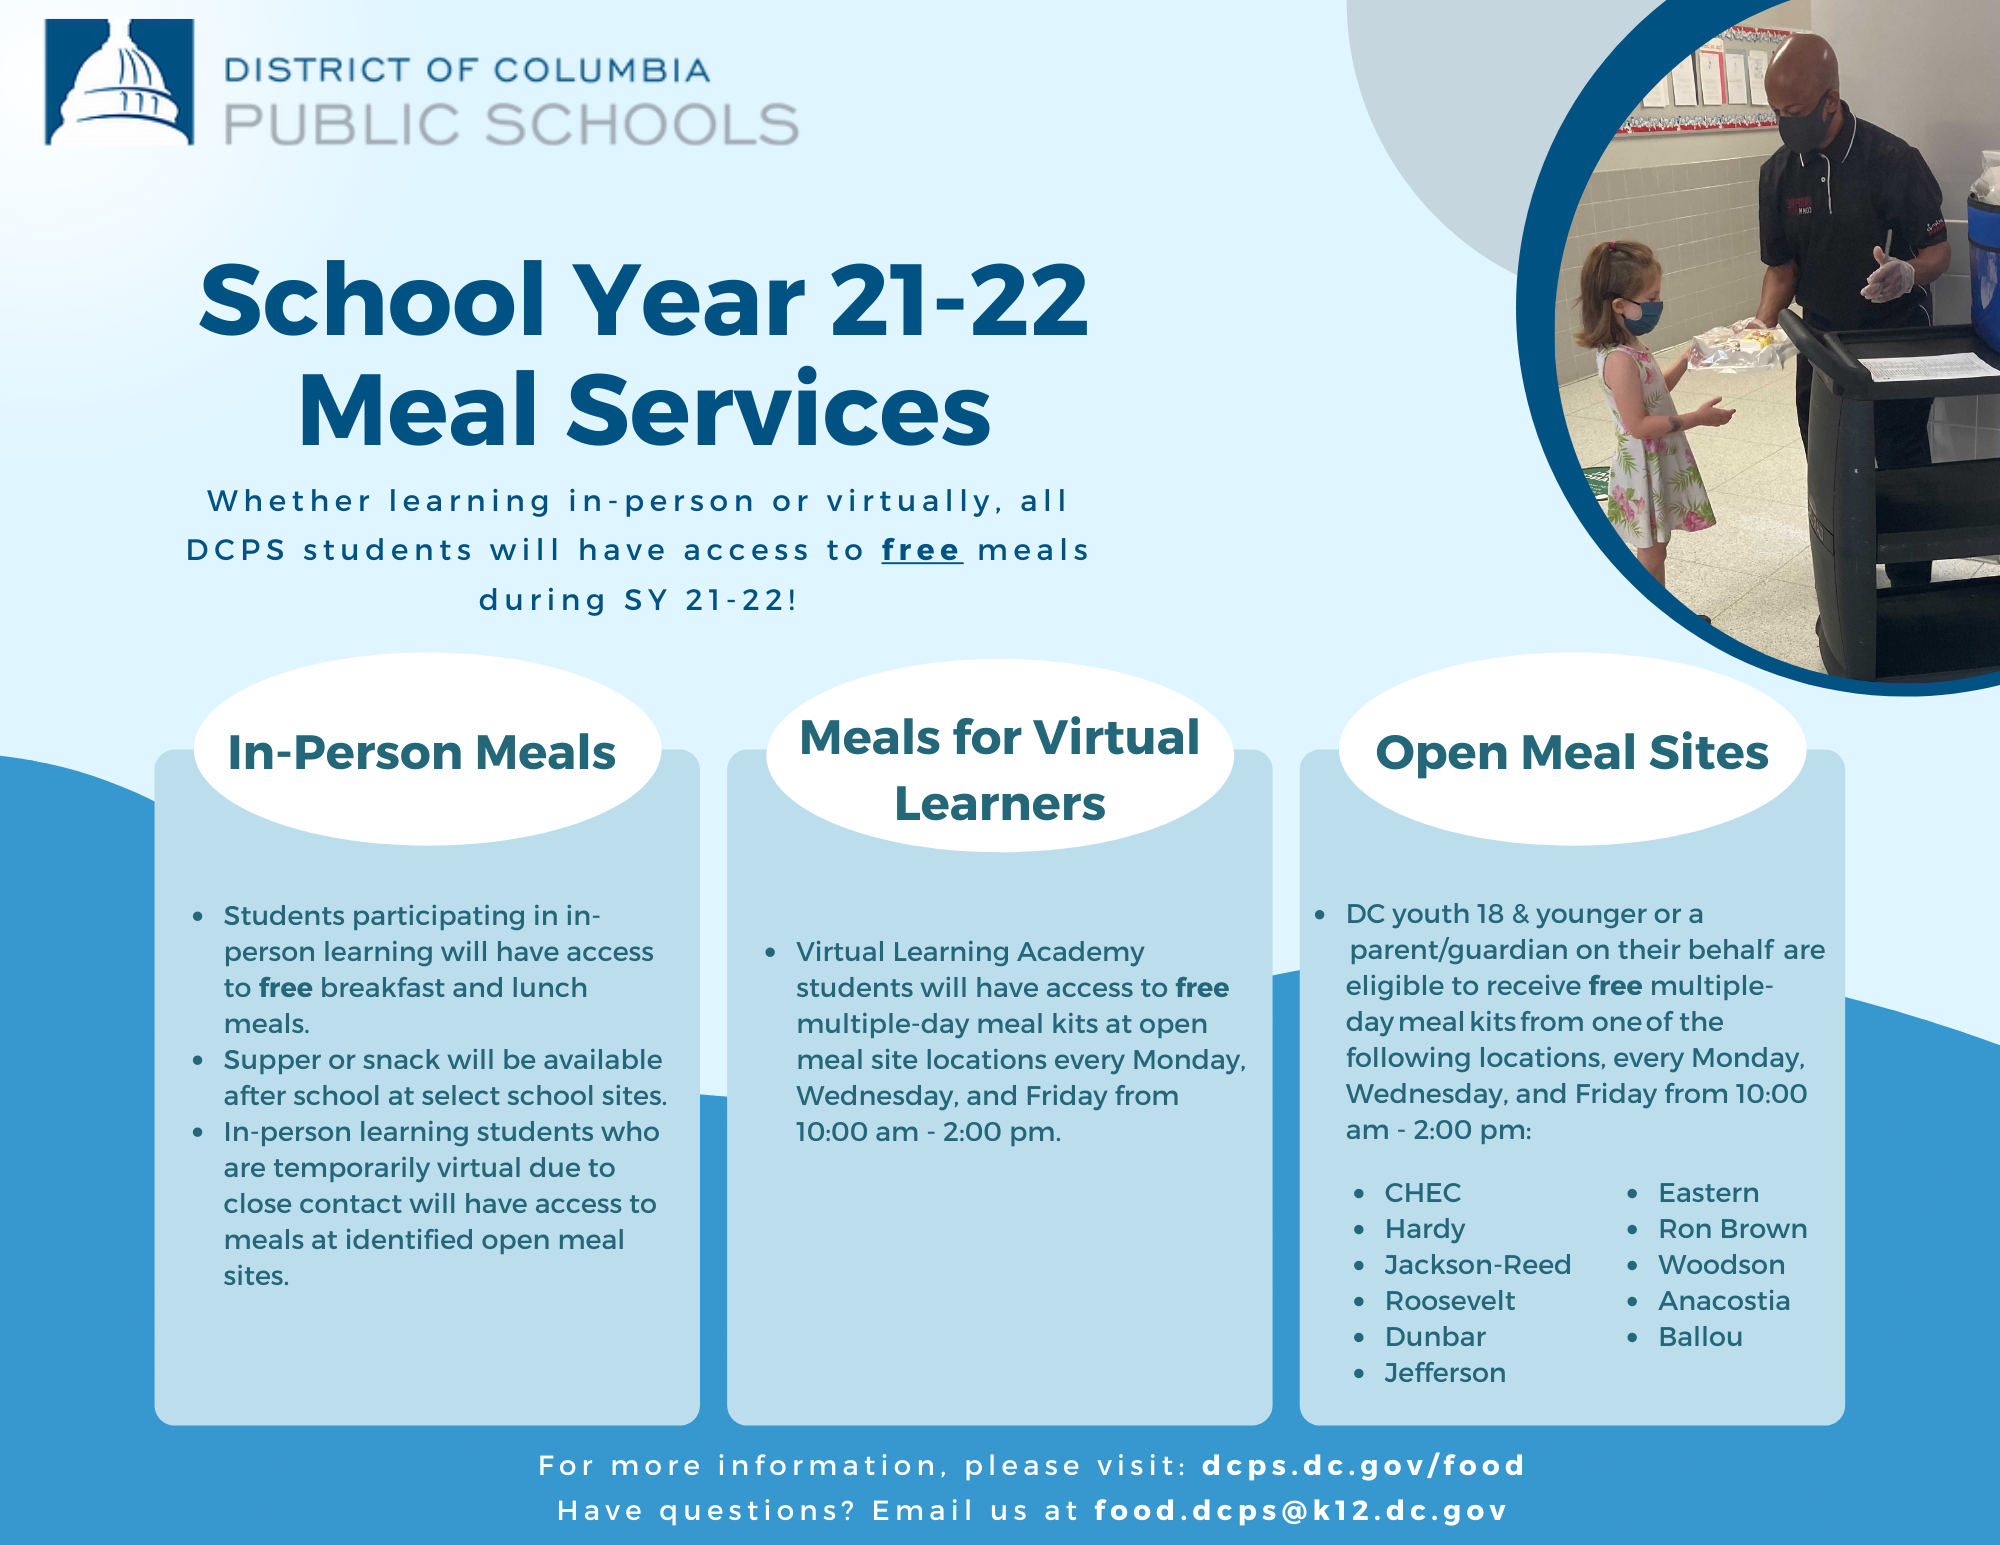 School Year 21-22 Meal Services